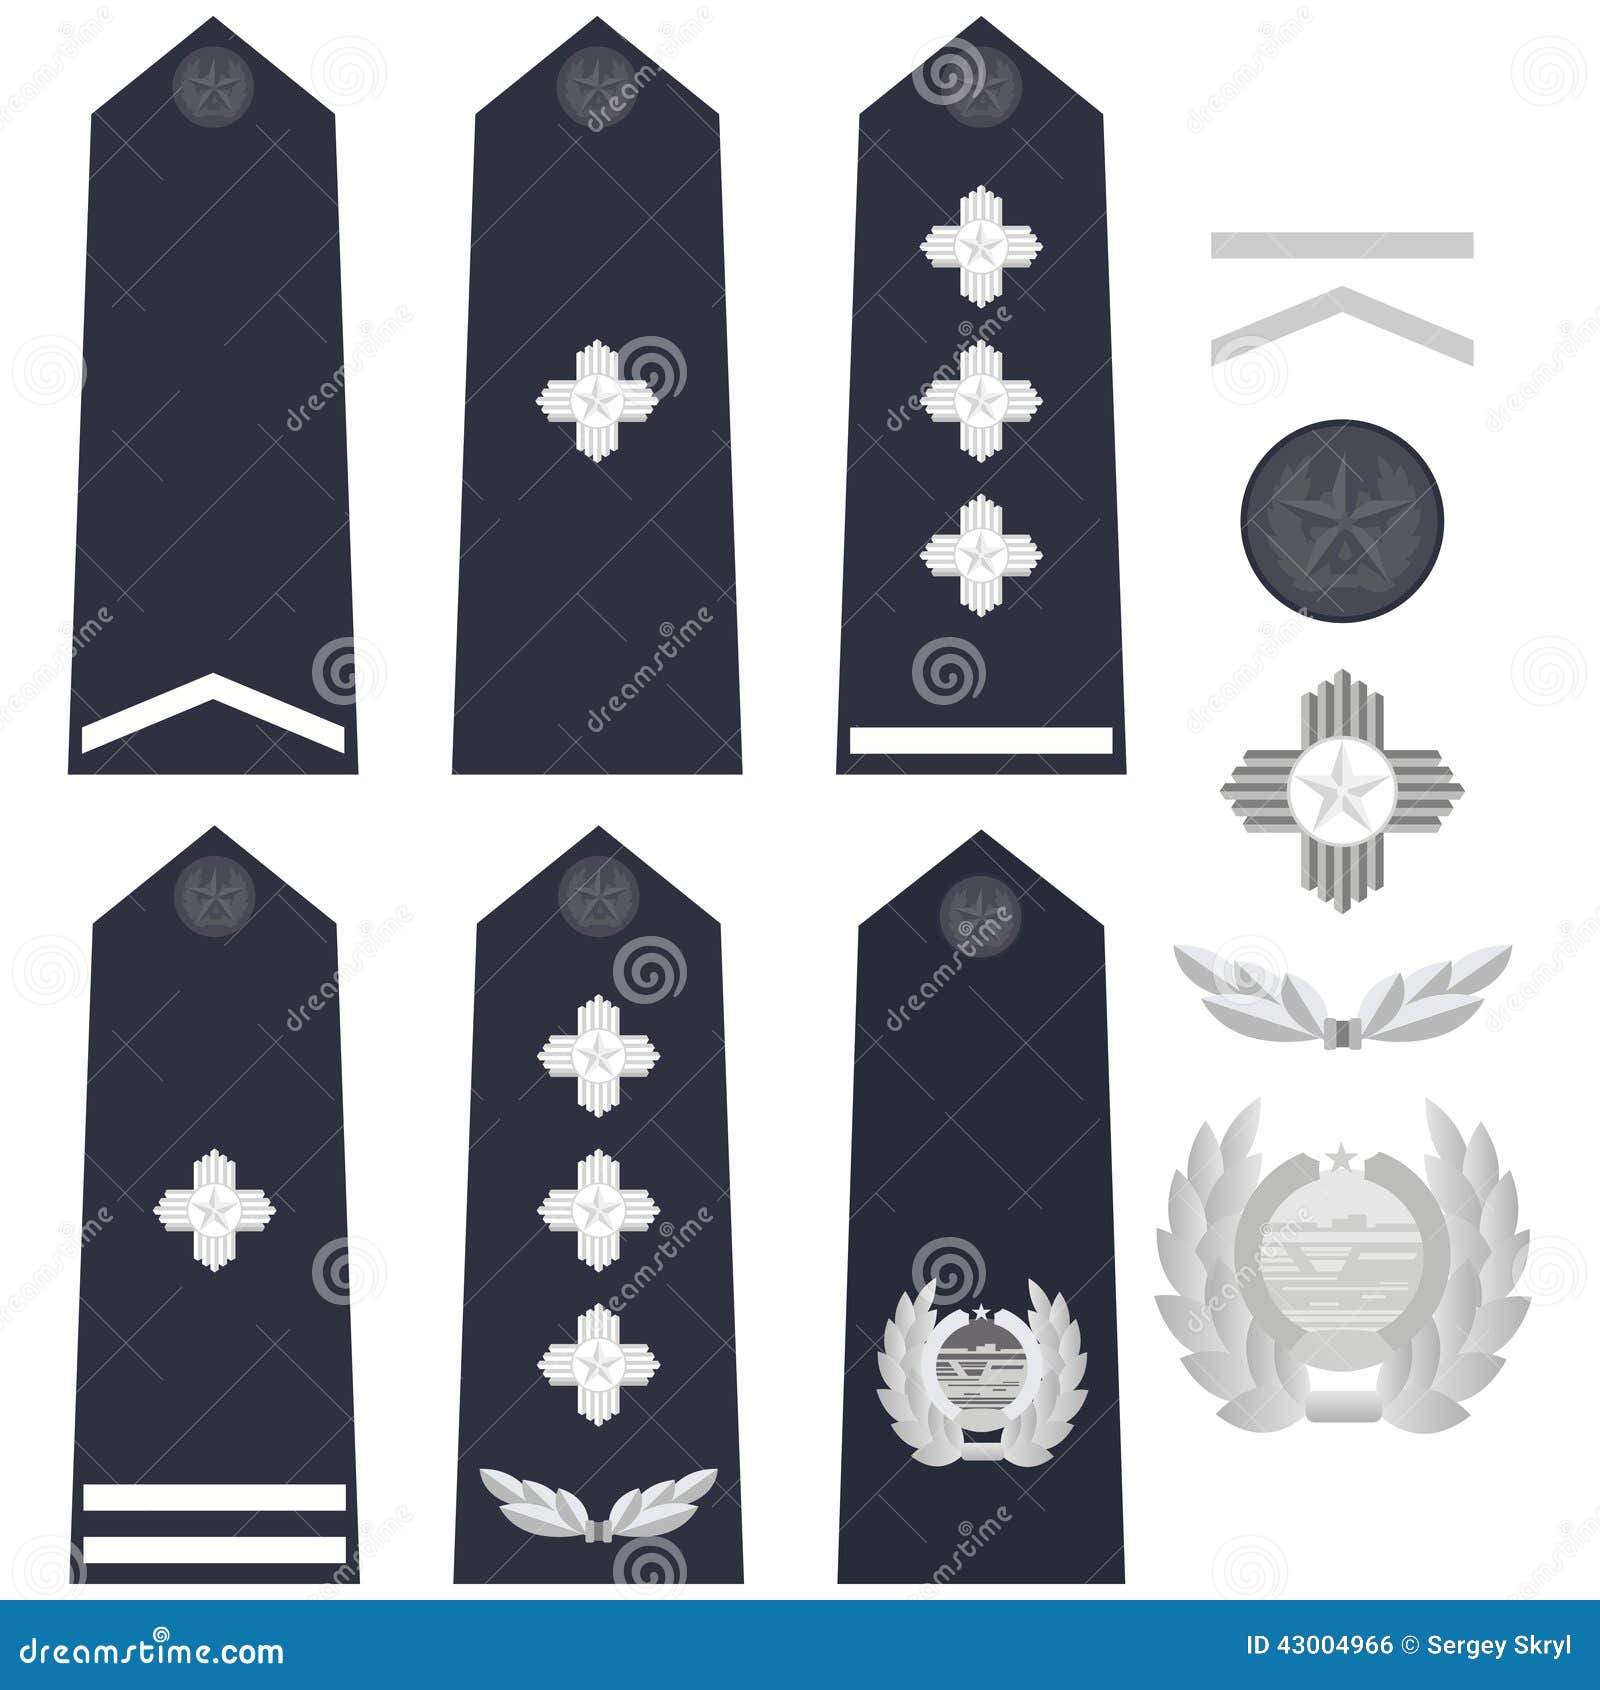 Chinese Police Insignia Stock Vector - Image: 43004966